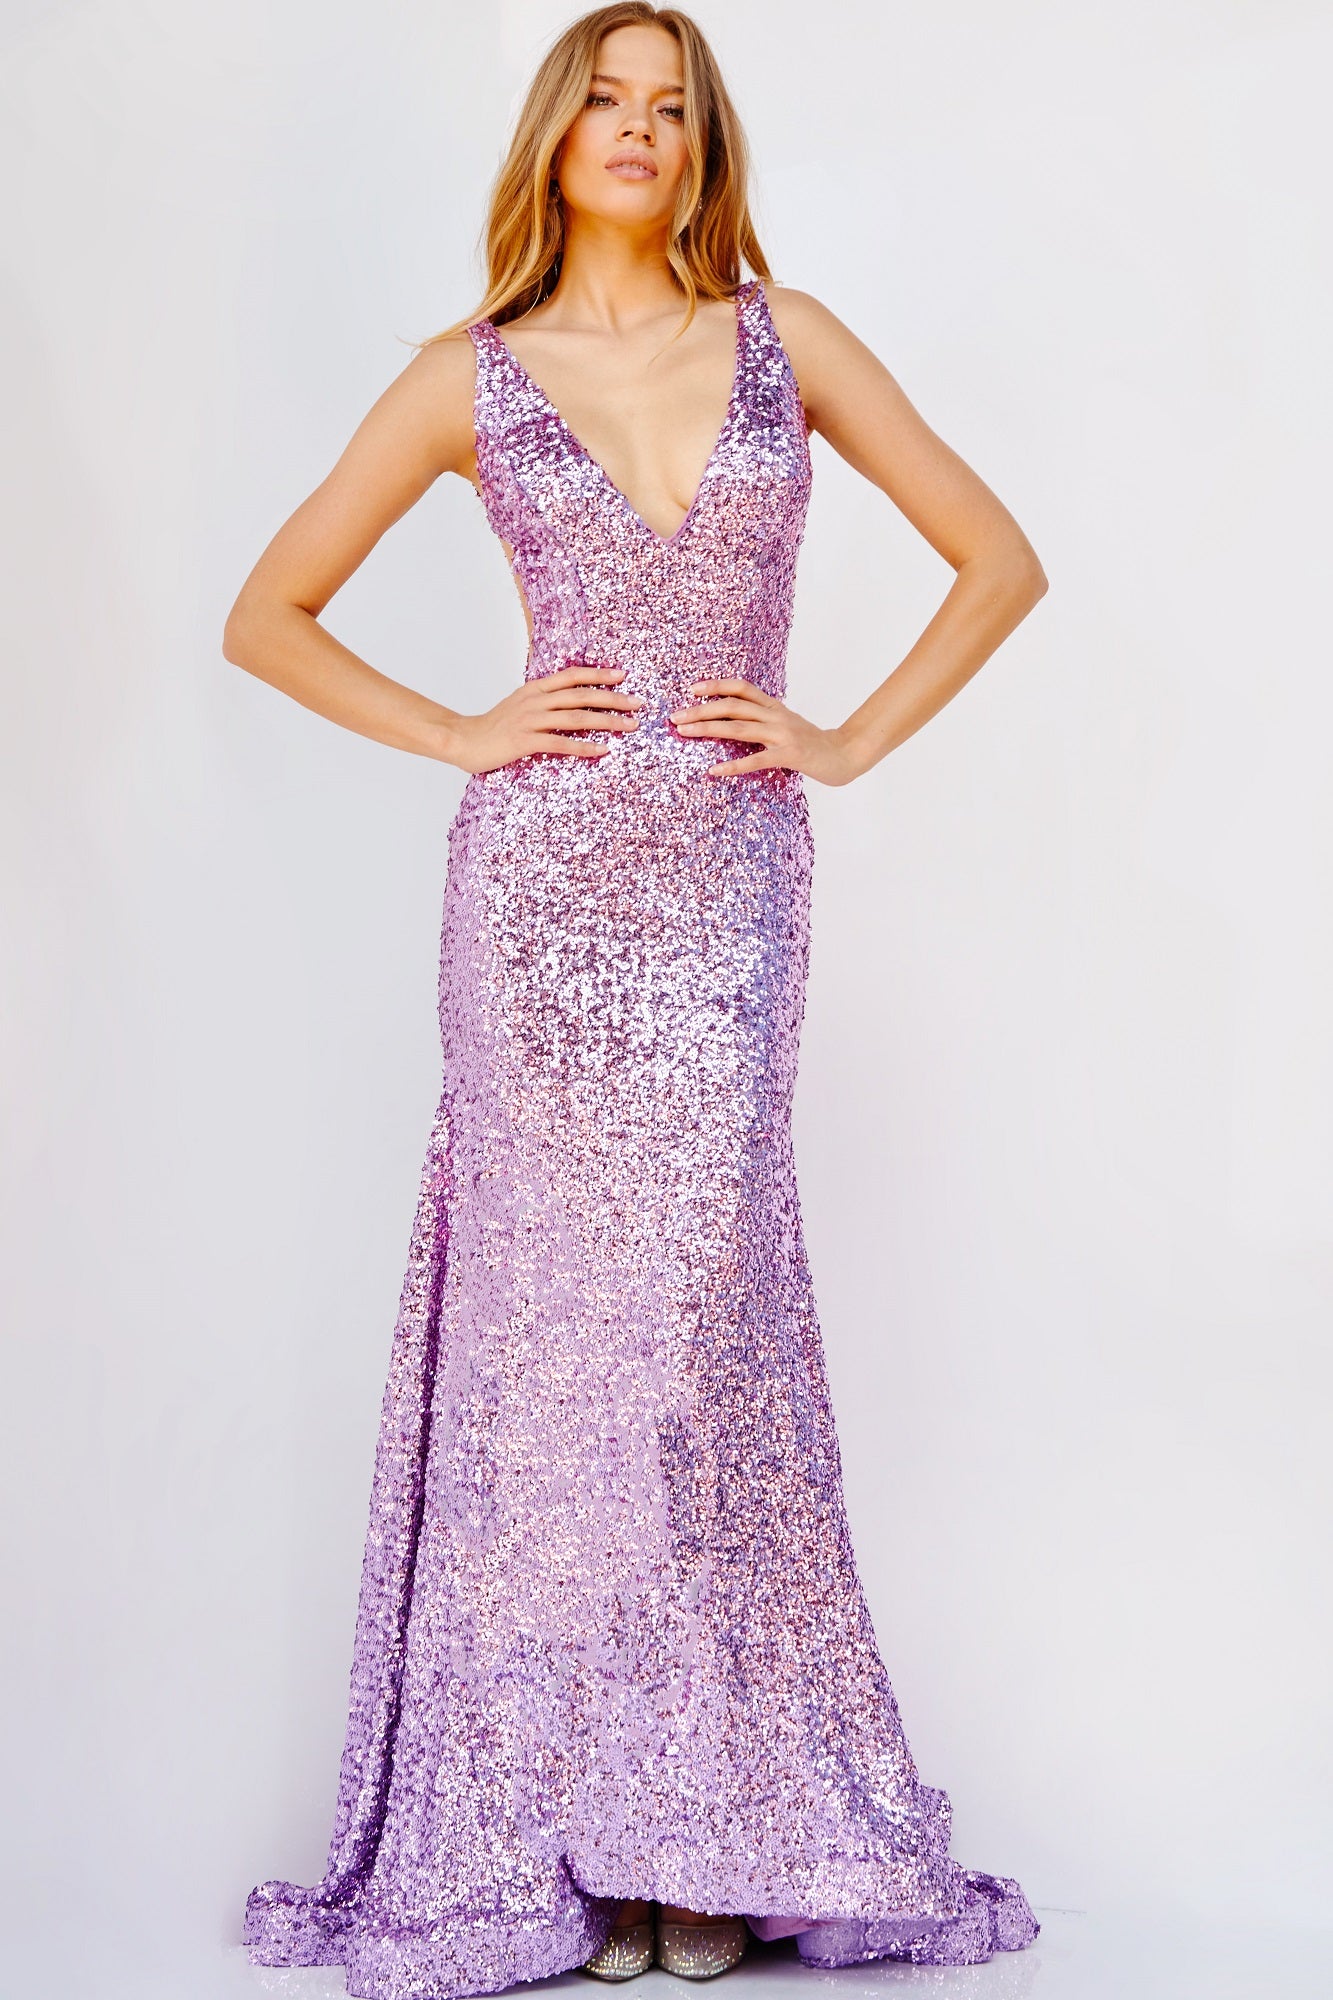 Jovani 23079 This long fit and flare prom dress is adorned with shimmering sequins, a plunging V neckline, and finished with an elegant horsehair trim and sweeping train.  Available colors:  Lilac, Emerald, Turquoise, Gold